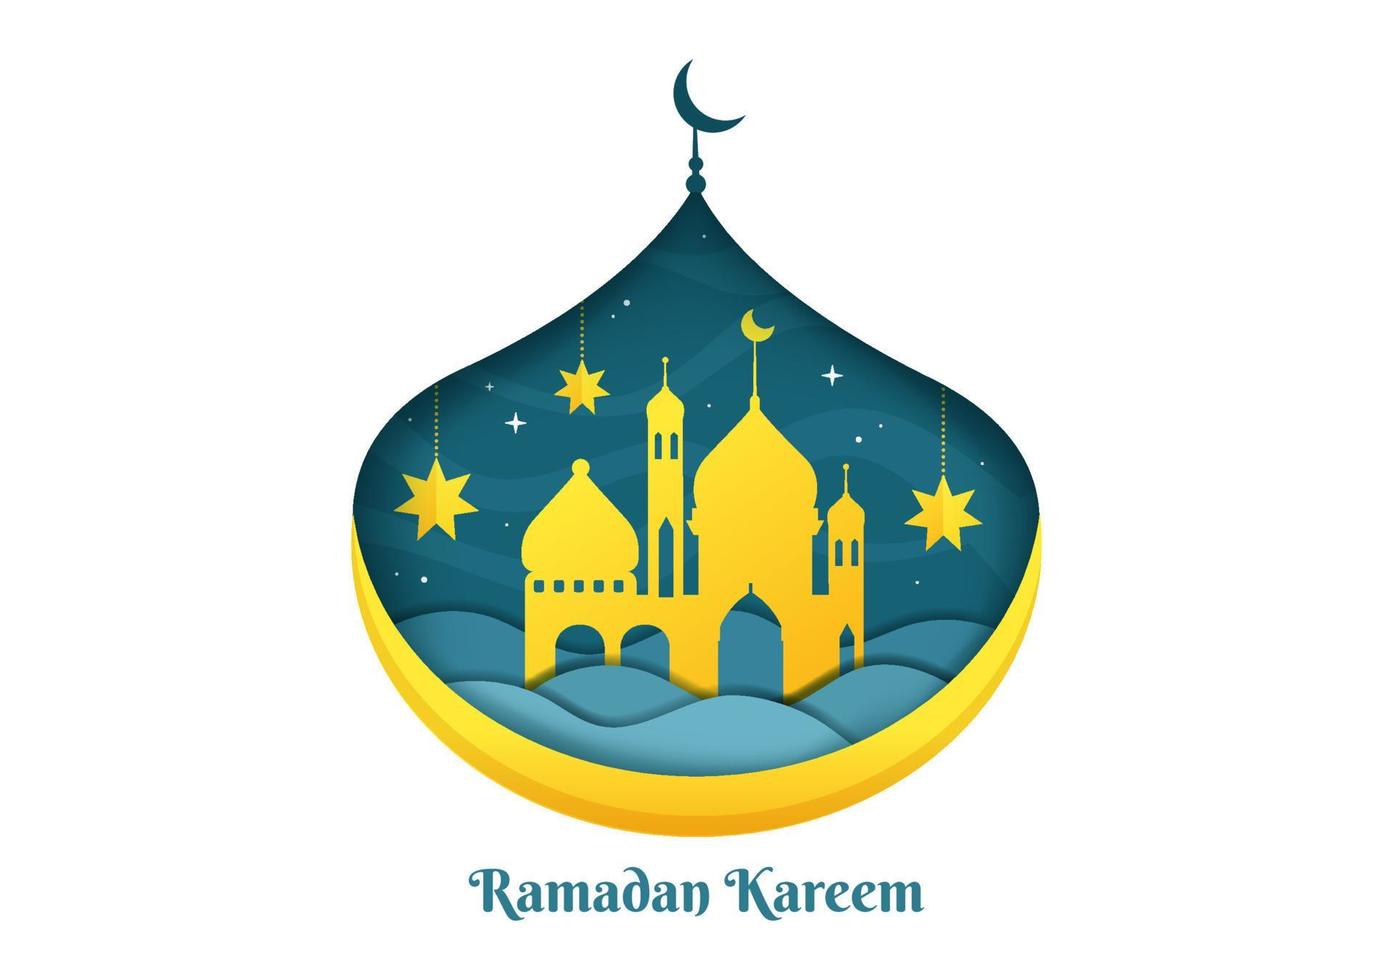 Ramadan Kareem with Mosque, Lanterns and Moon in Flat Background Vector Illustration for Religious Holiday Islamic Eid Fitr or Adha Festival Banner or Poster